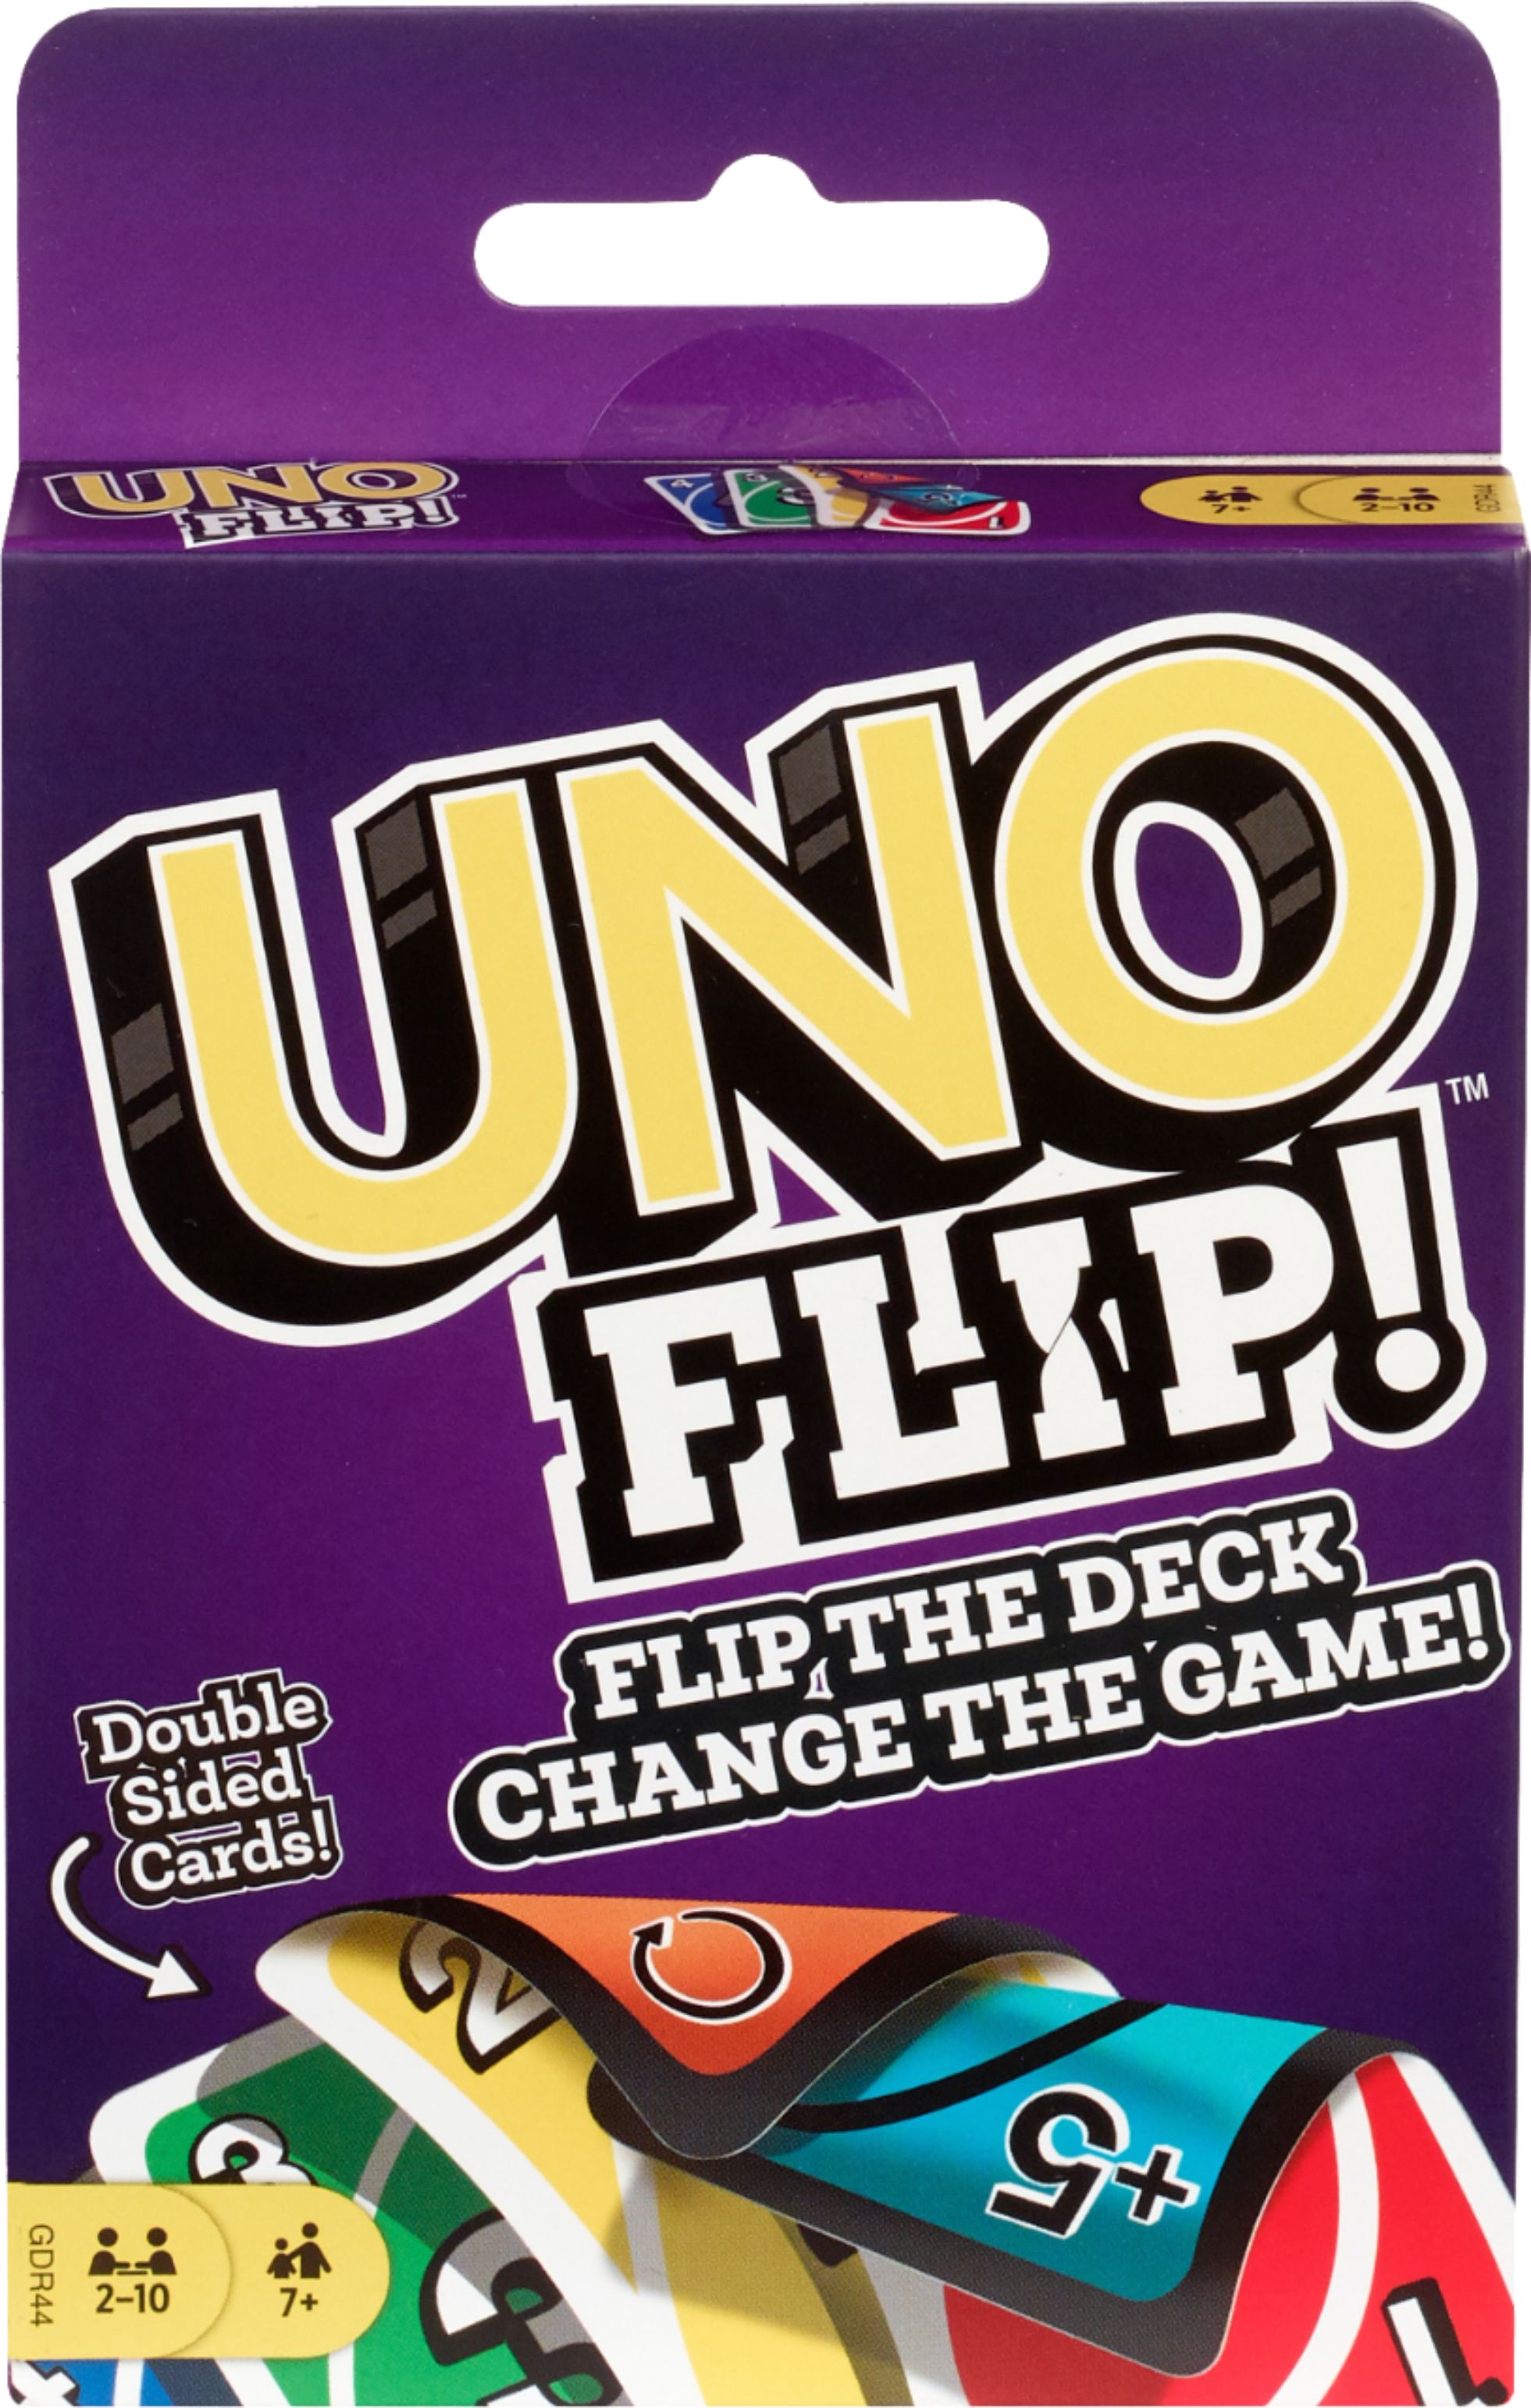 Mattel UNO Flip GDR44 Double Sided Card Game for 2-10 Players Ages 7Y for sale online 